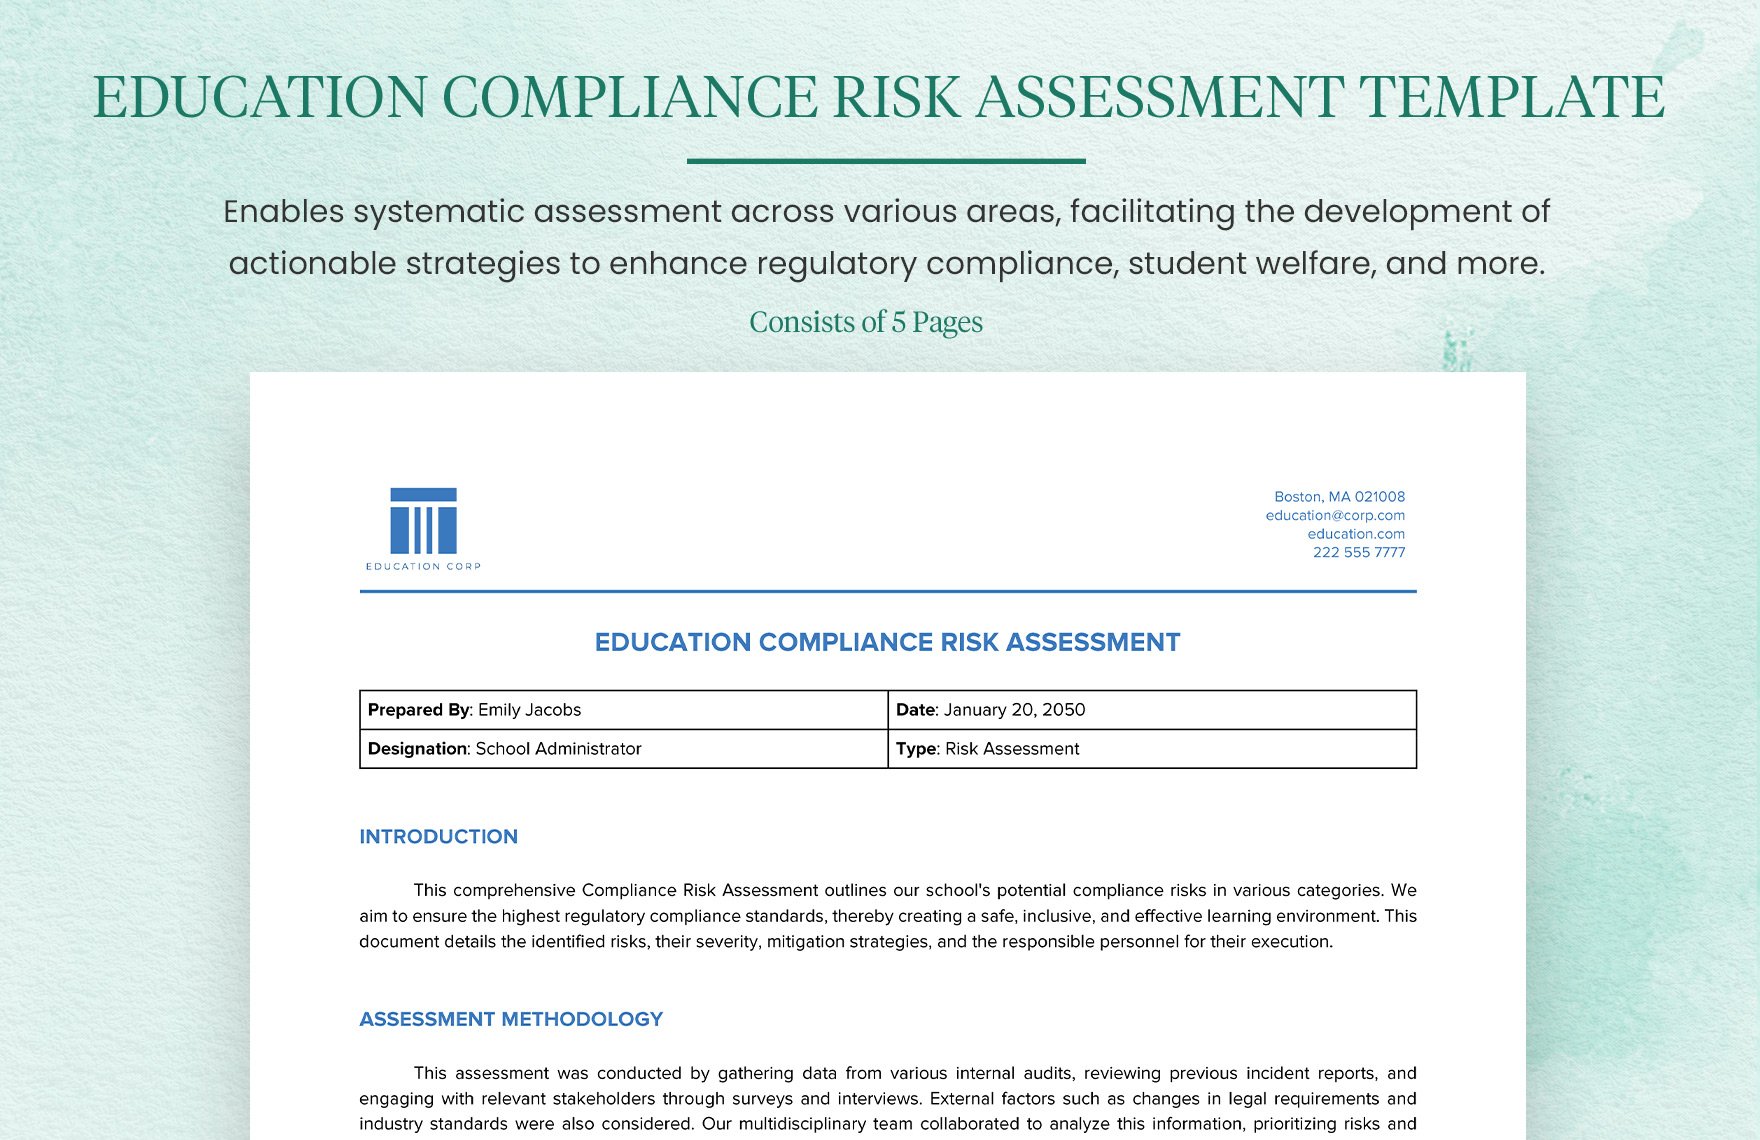 Education Compliance Risk Assessment Template in Word, Google Docs, PDF